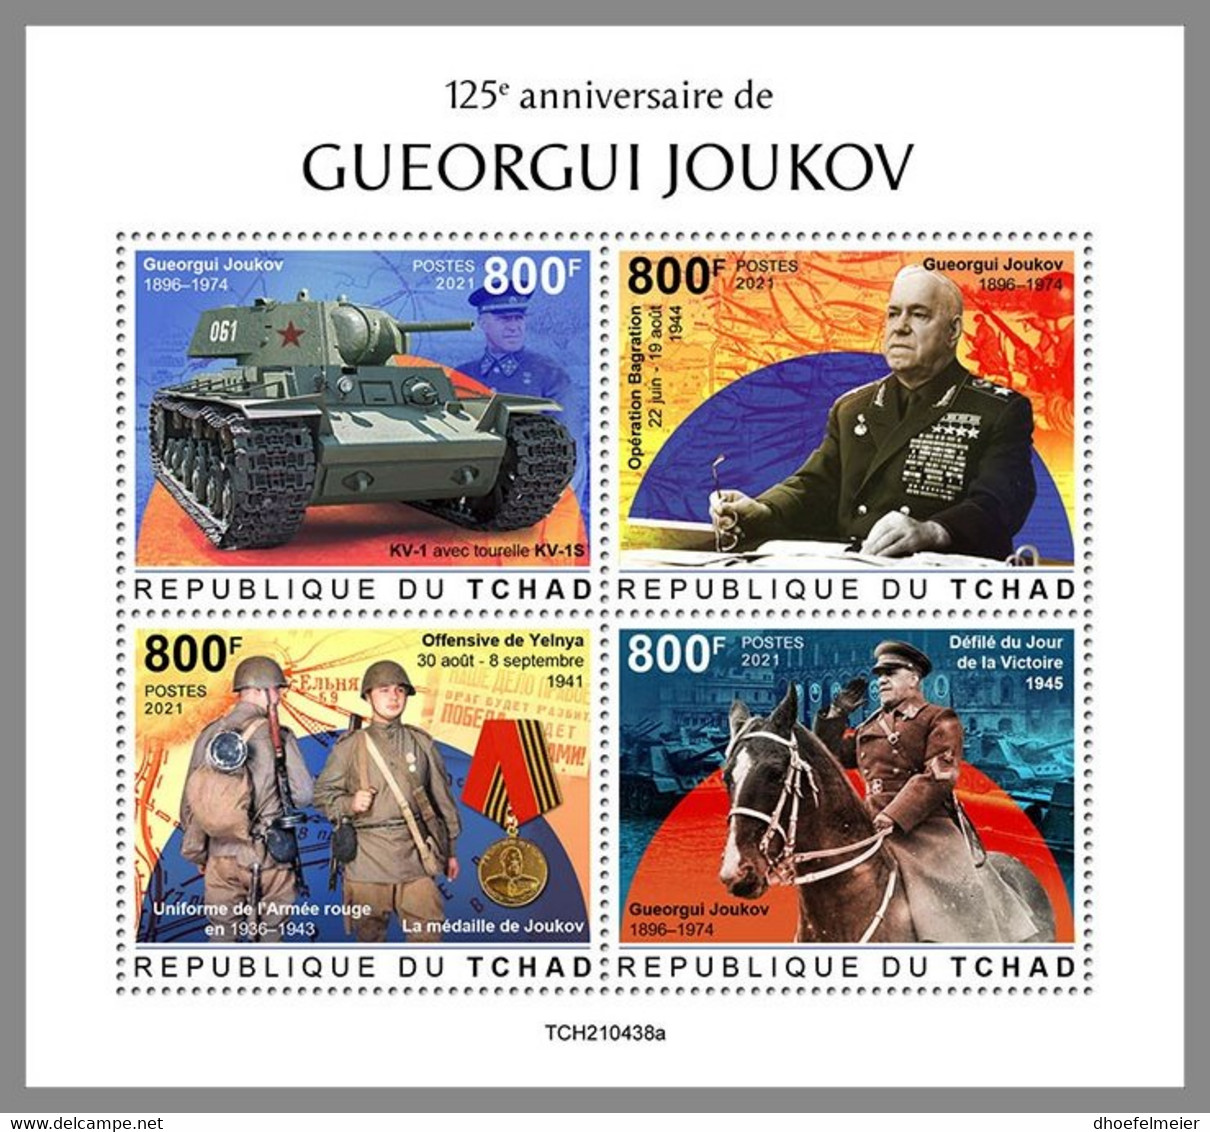 CHAD 2021 MNH WWII Georgi Konstantinowitsch Schukow M/S - OFFICIAL ISSUE - DHQ2204 - Guerre Mondiale (Seconde)